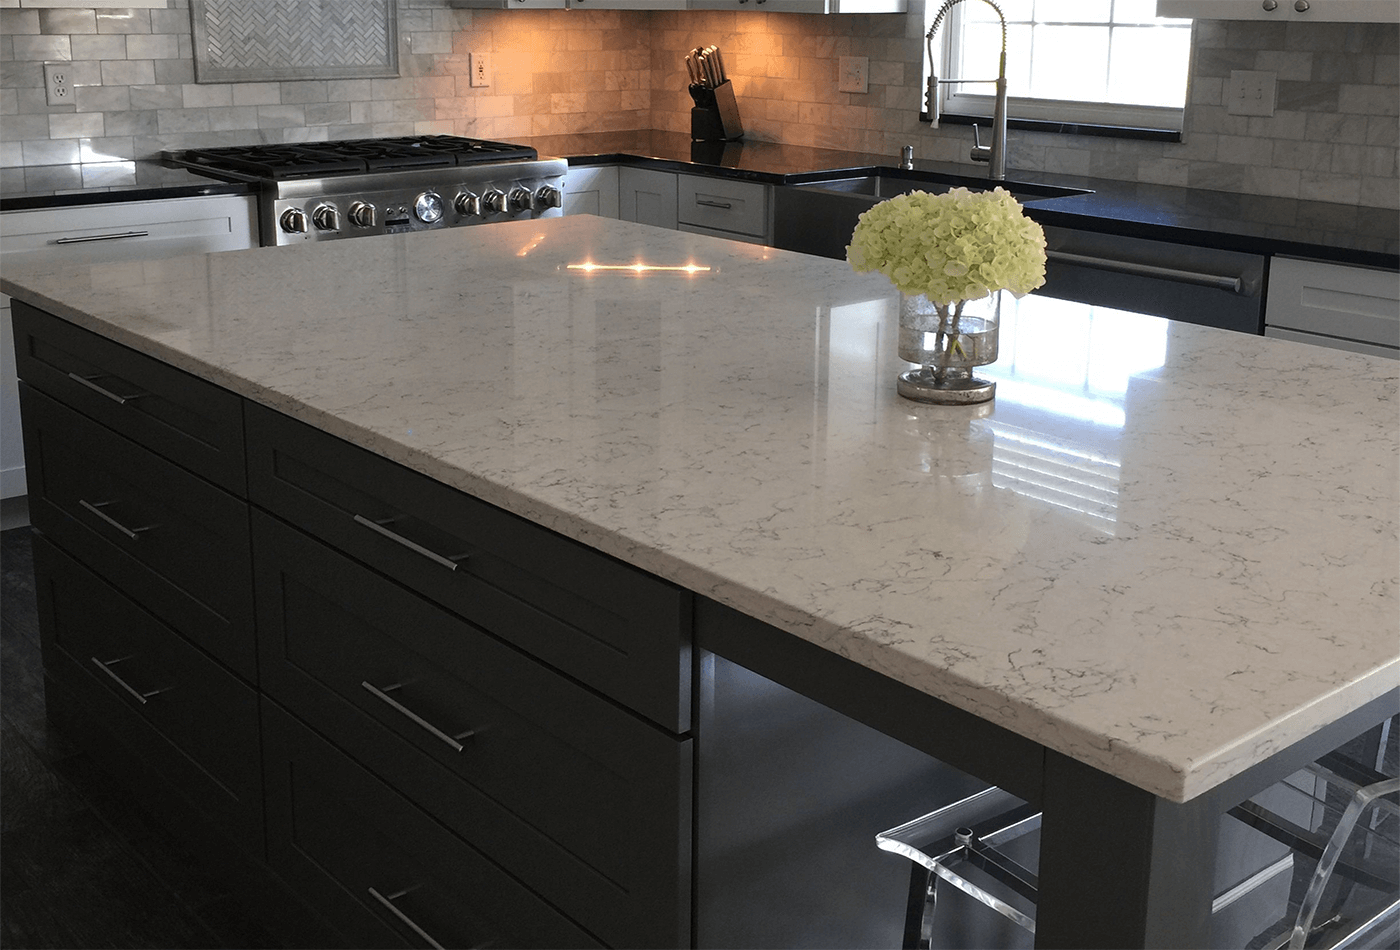 Why do you need Silestone for your kitchen